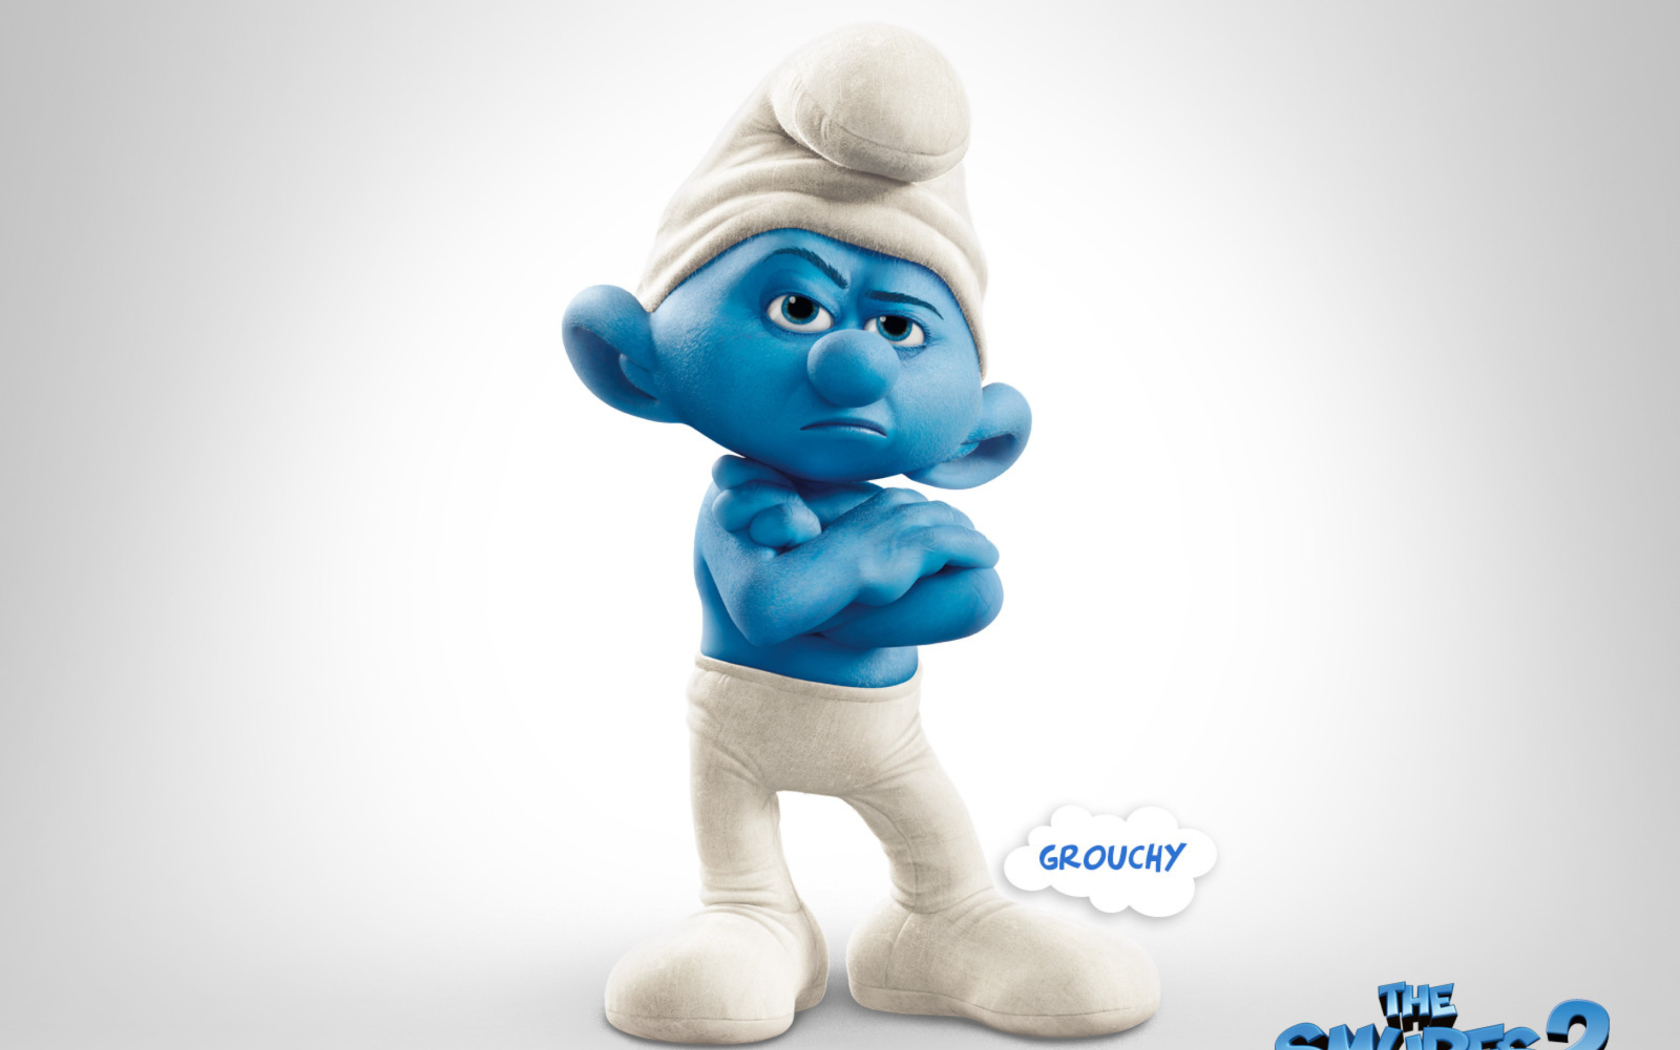 Grouchy The Smurfs 2 wallpaper 1680x1050